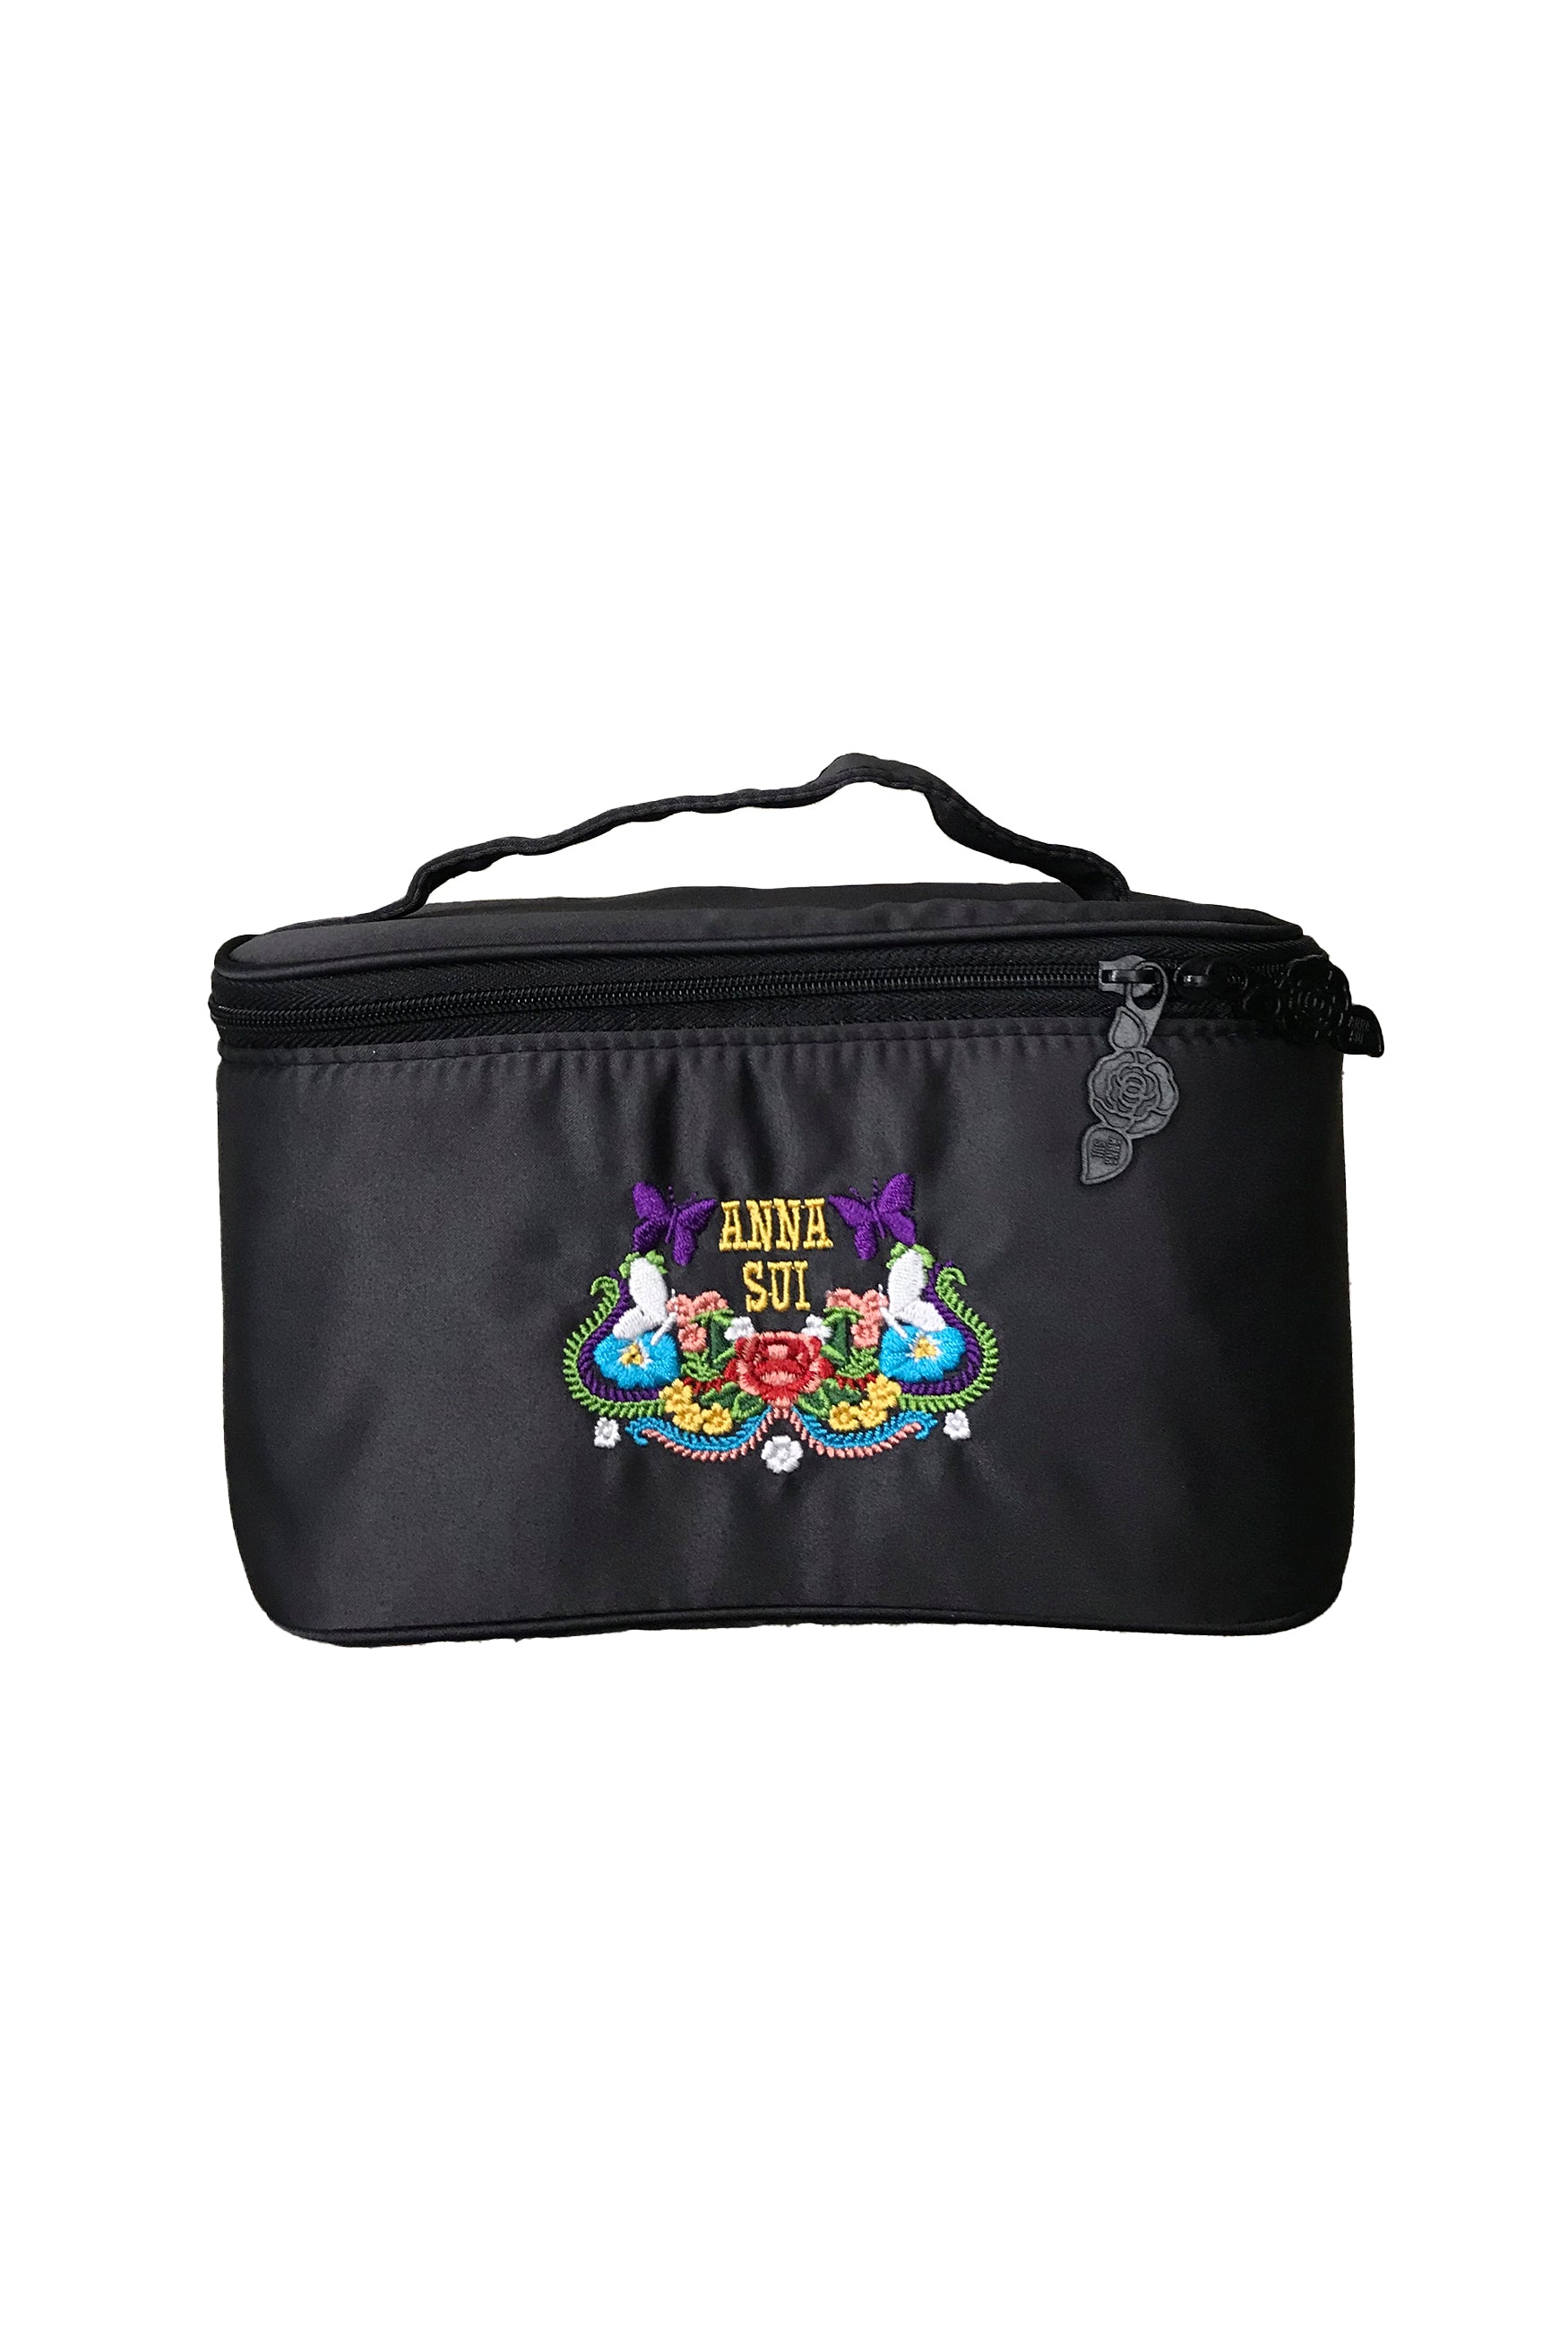 Black Anna Sui Vanity Pouch - with zipper, rose for unzipping, labeled and adorned with Anna Label, butterflies and flowers